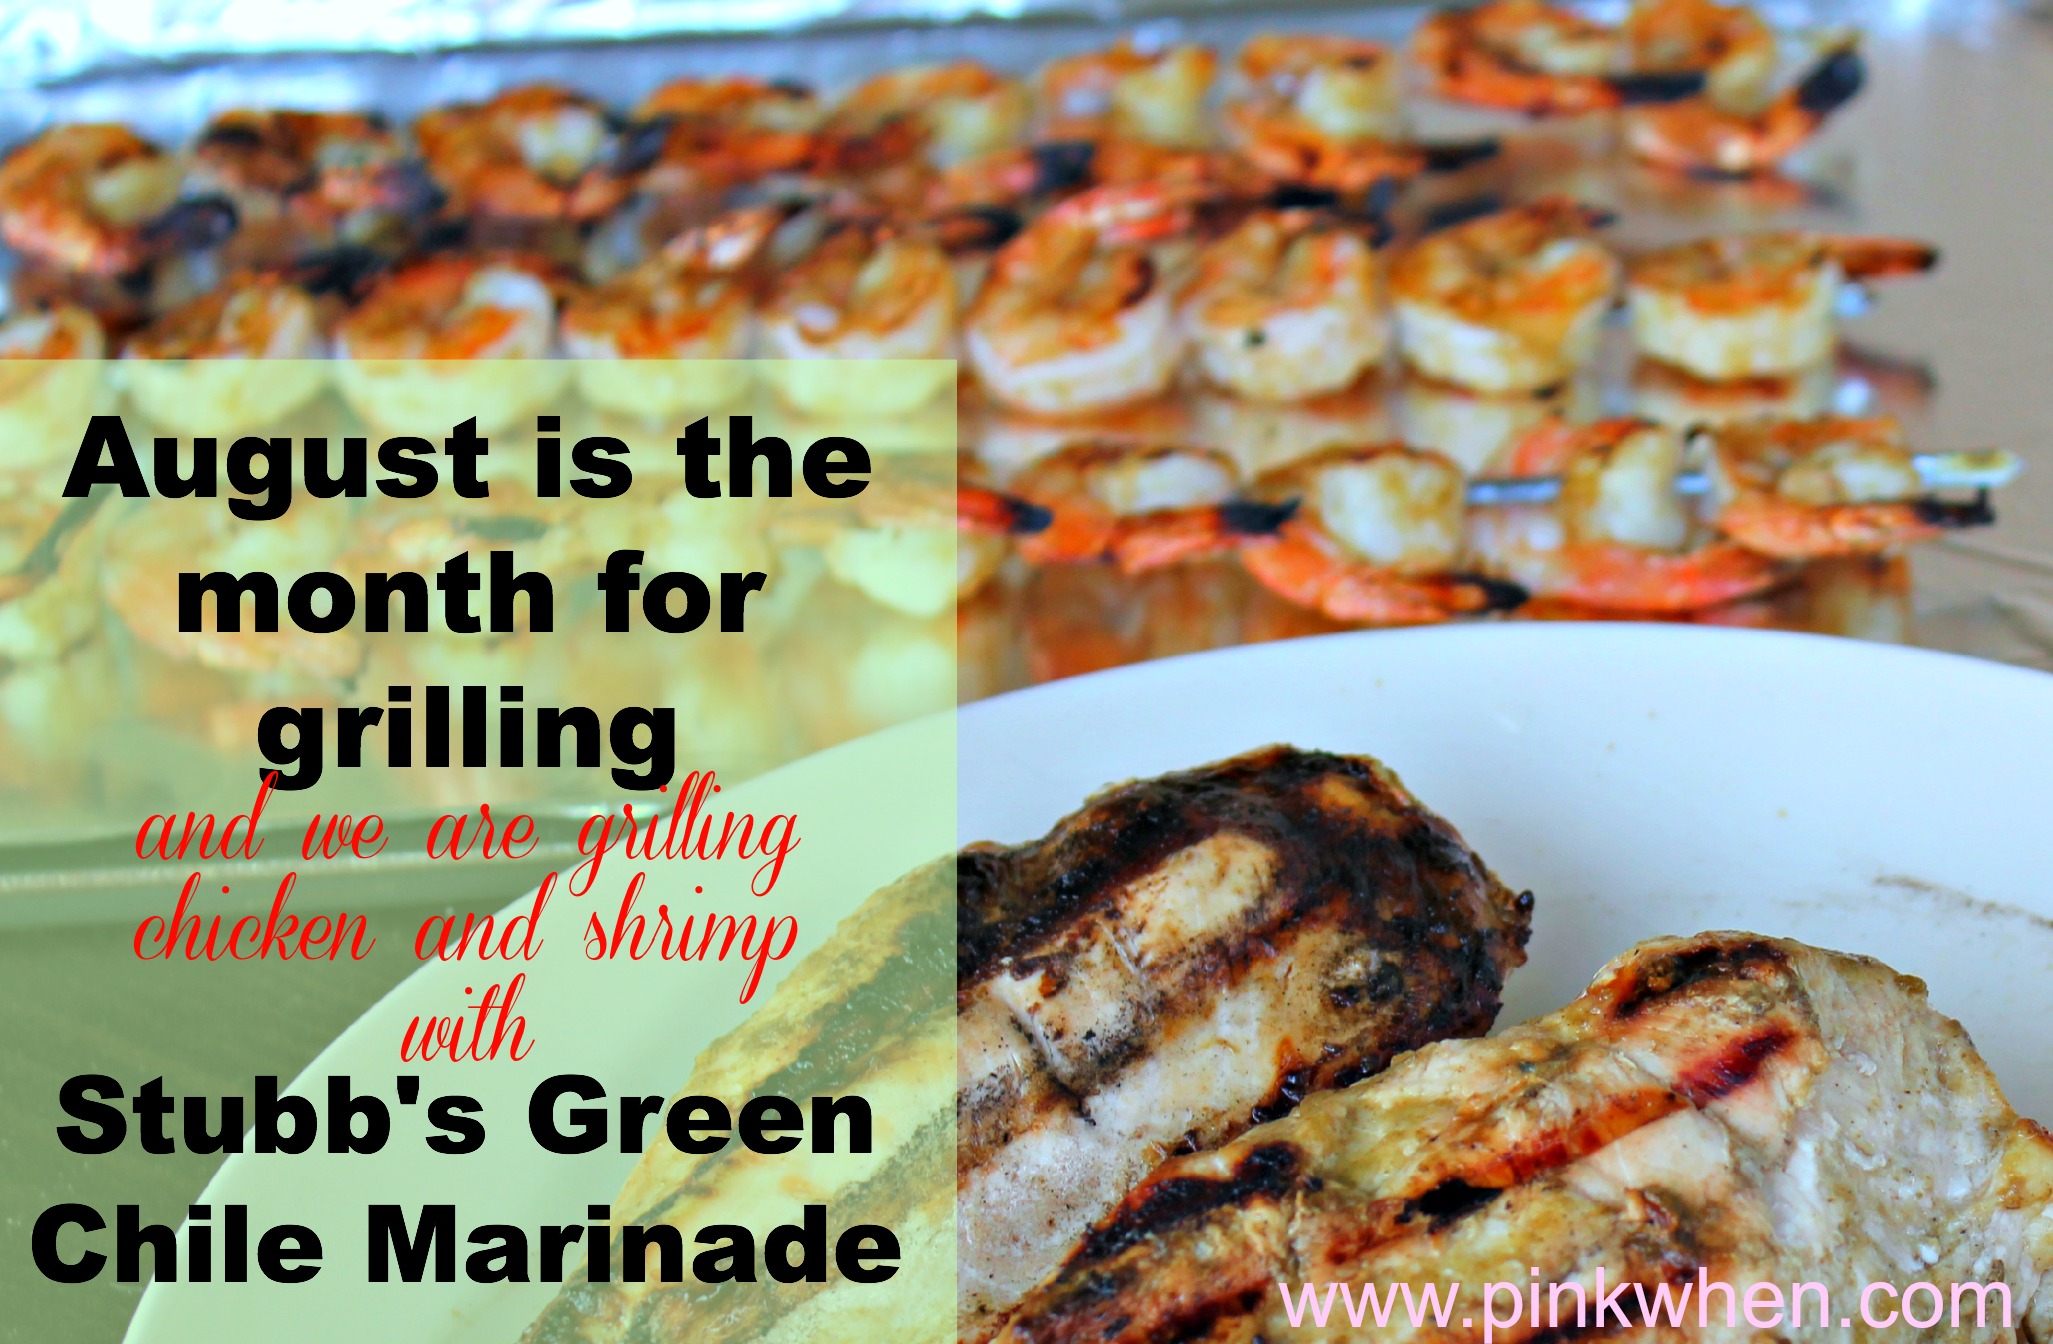 Grilled Chicken and Shrimp with Stubbs Green Chili Marinade